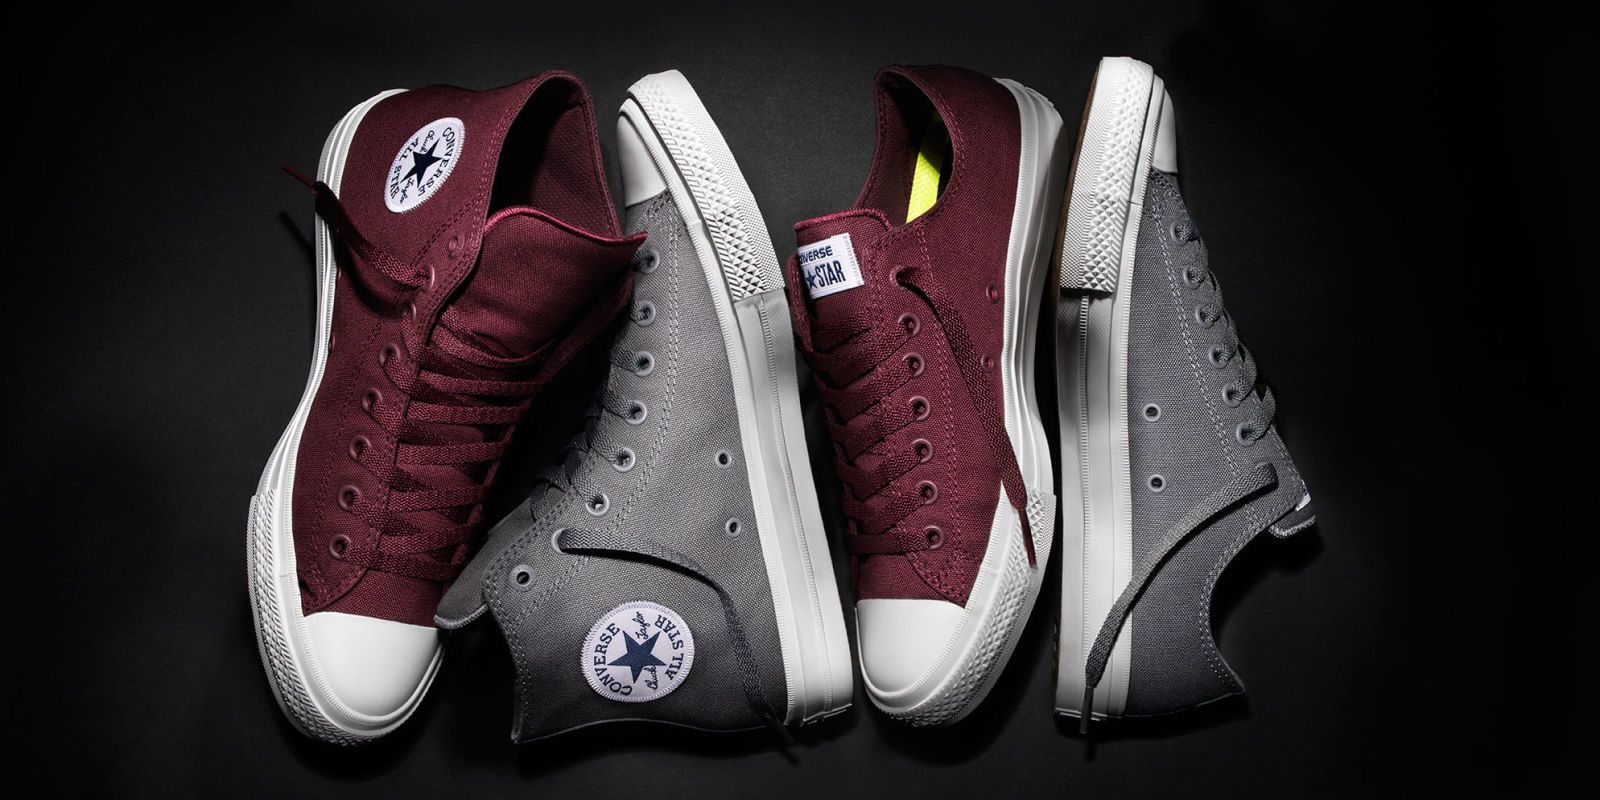 Converse Releases New Chuck II Colors for Fall - Converse Chuck ...